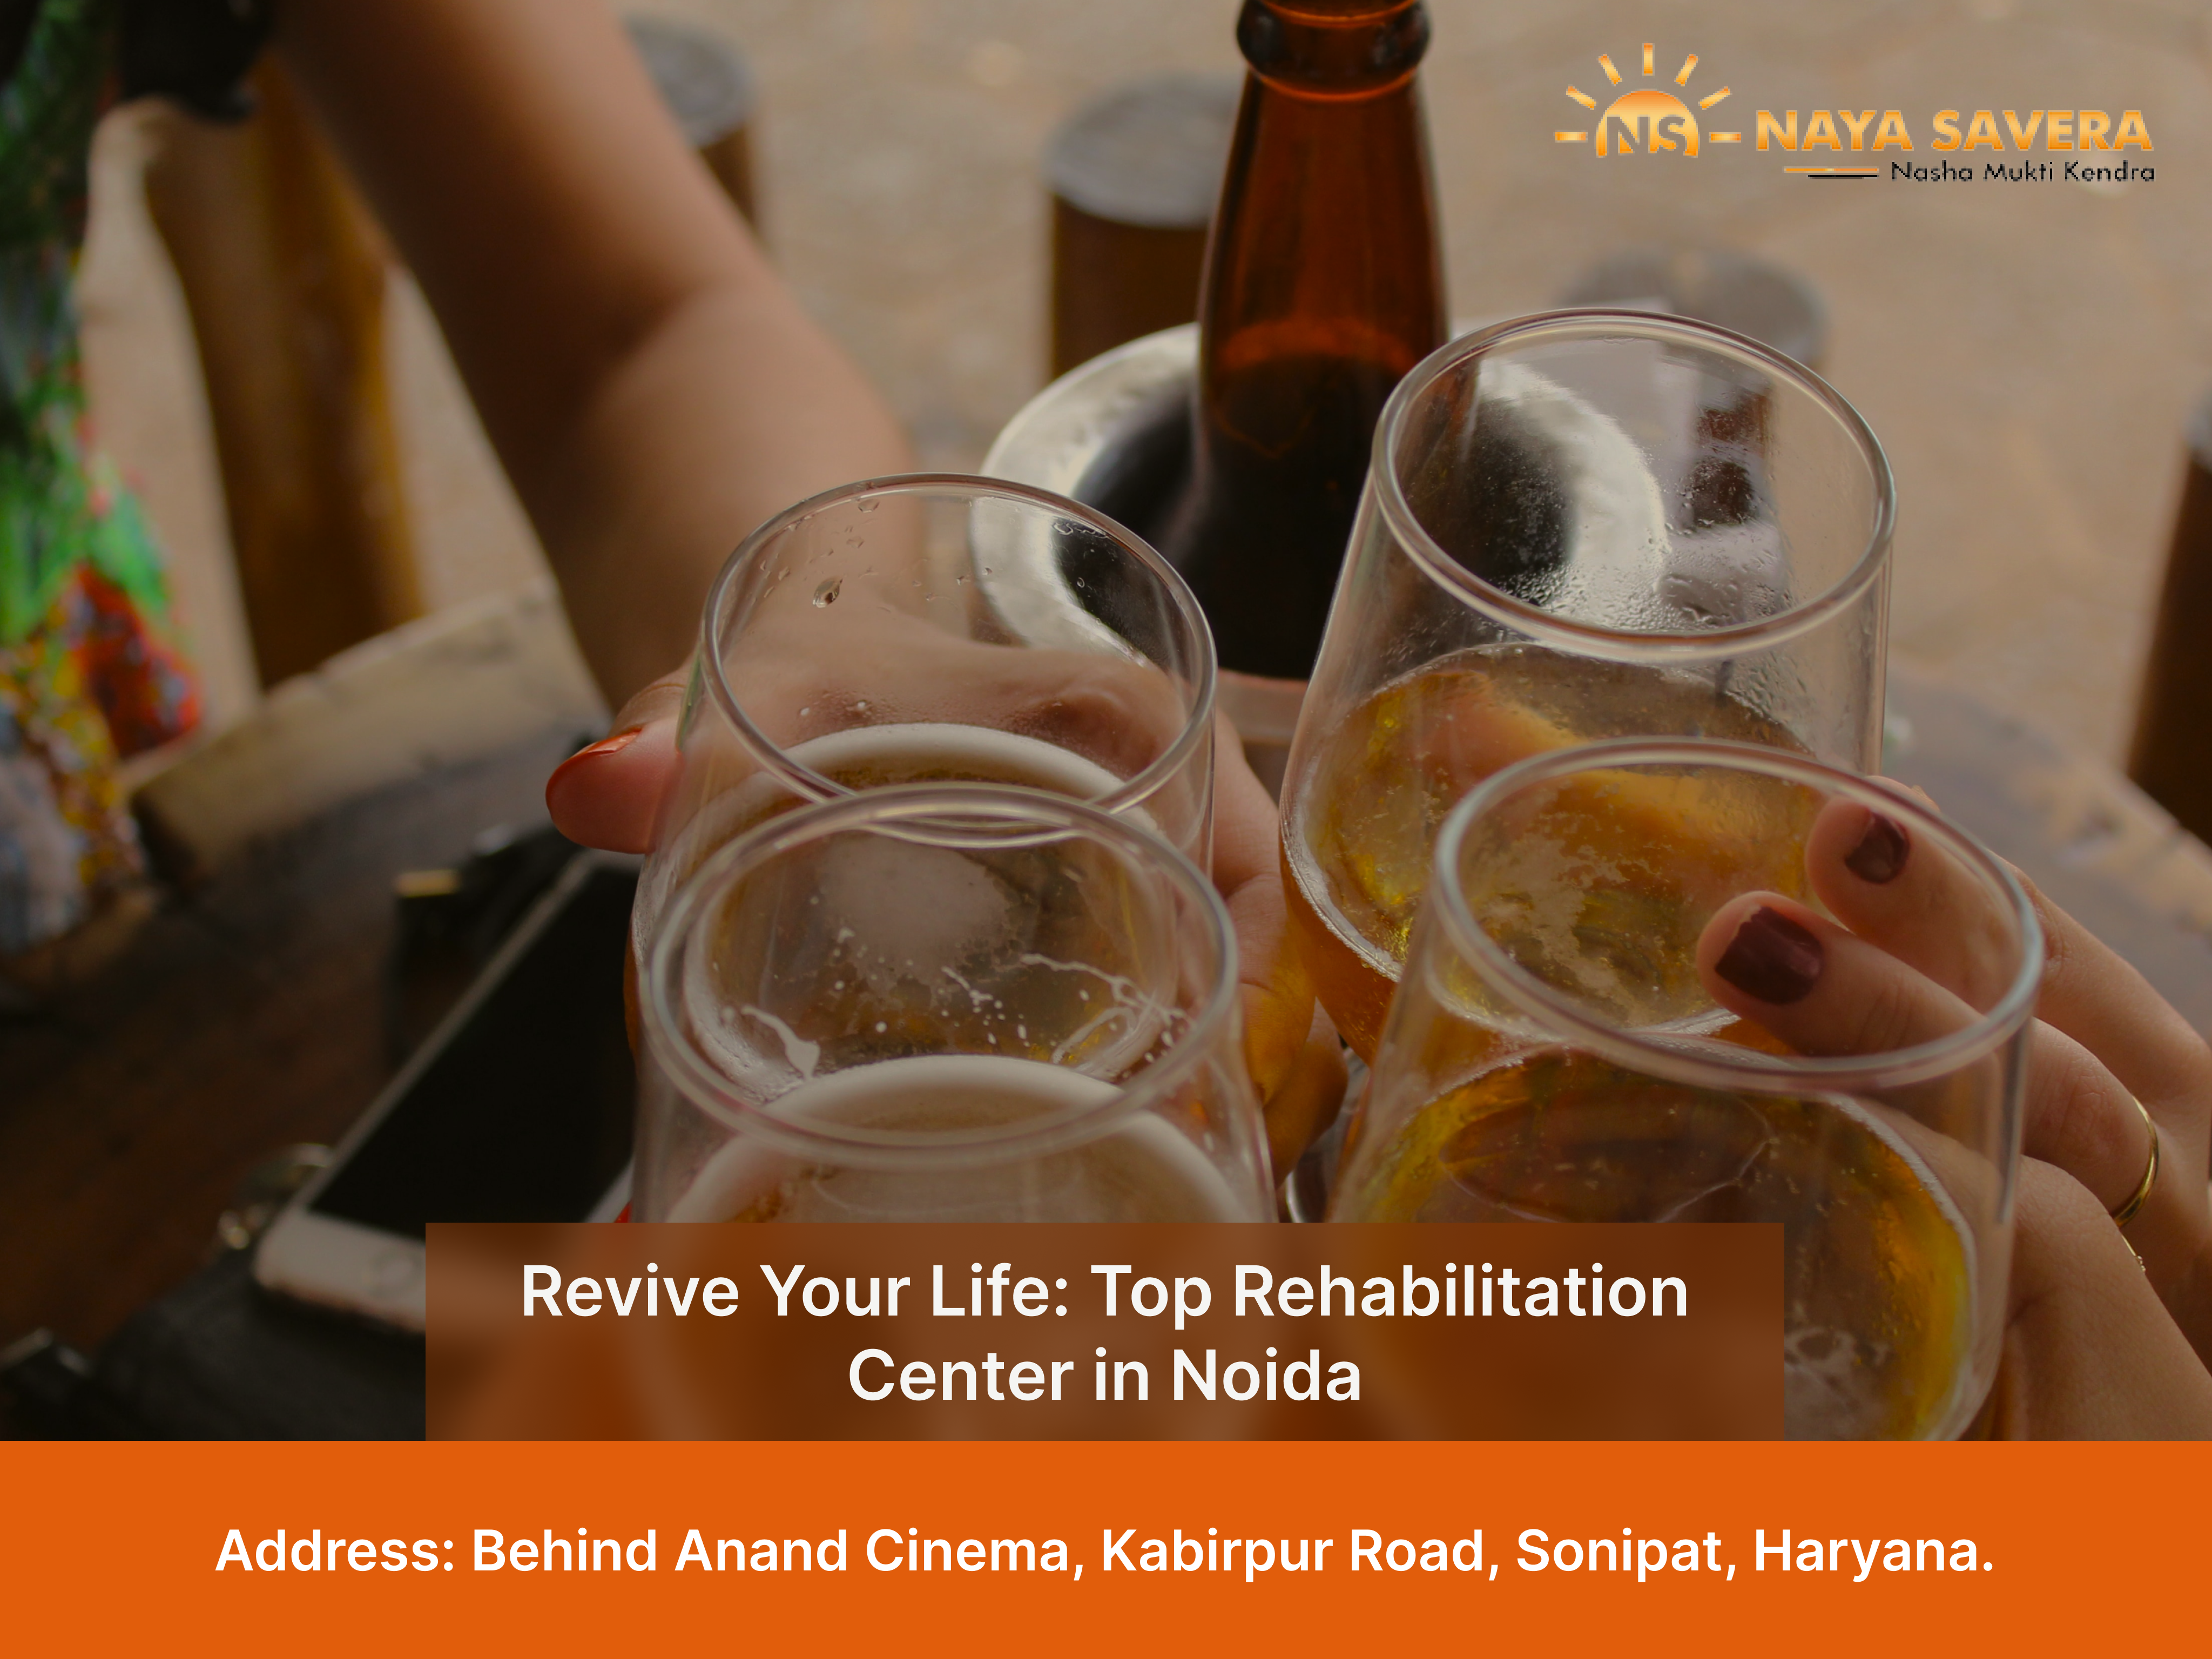 Revive Your Life: Top Rehabilitation Center in Noida